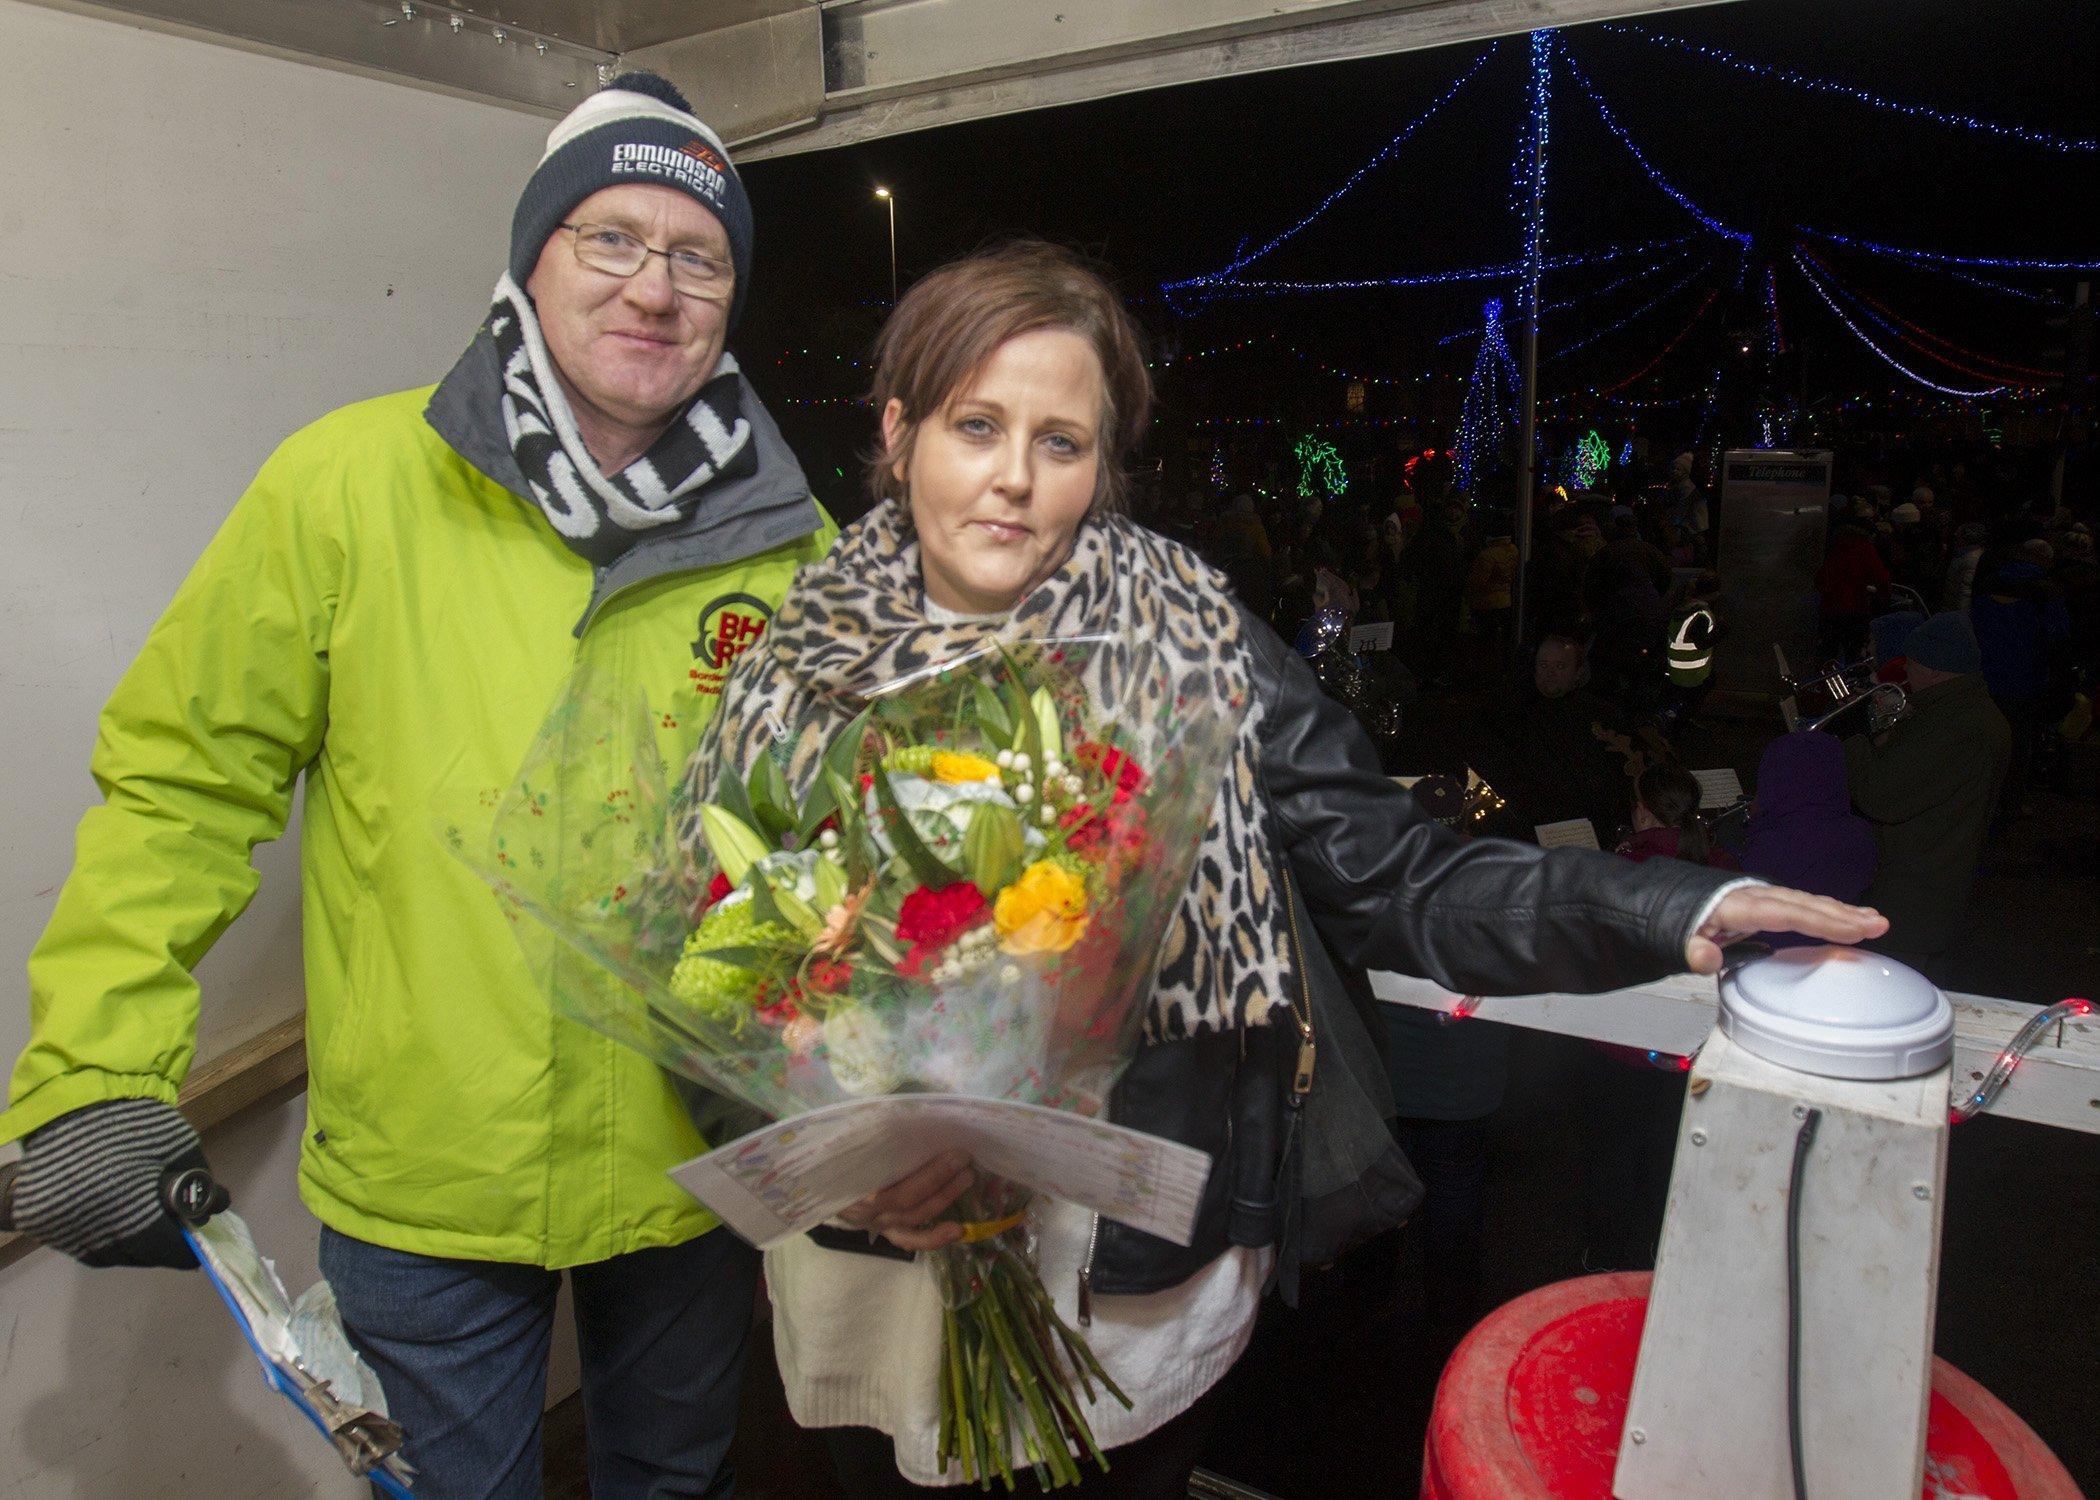 Scott Young assisting Sharon Harkness switching on Earlston's Spectacular Christmas lights